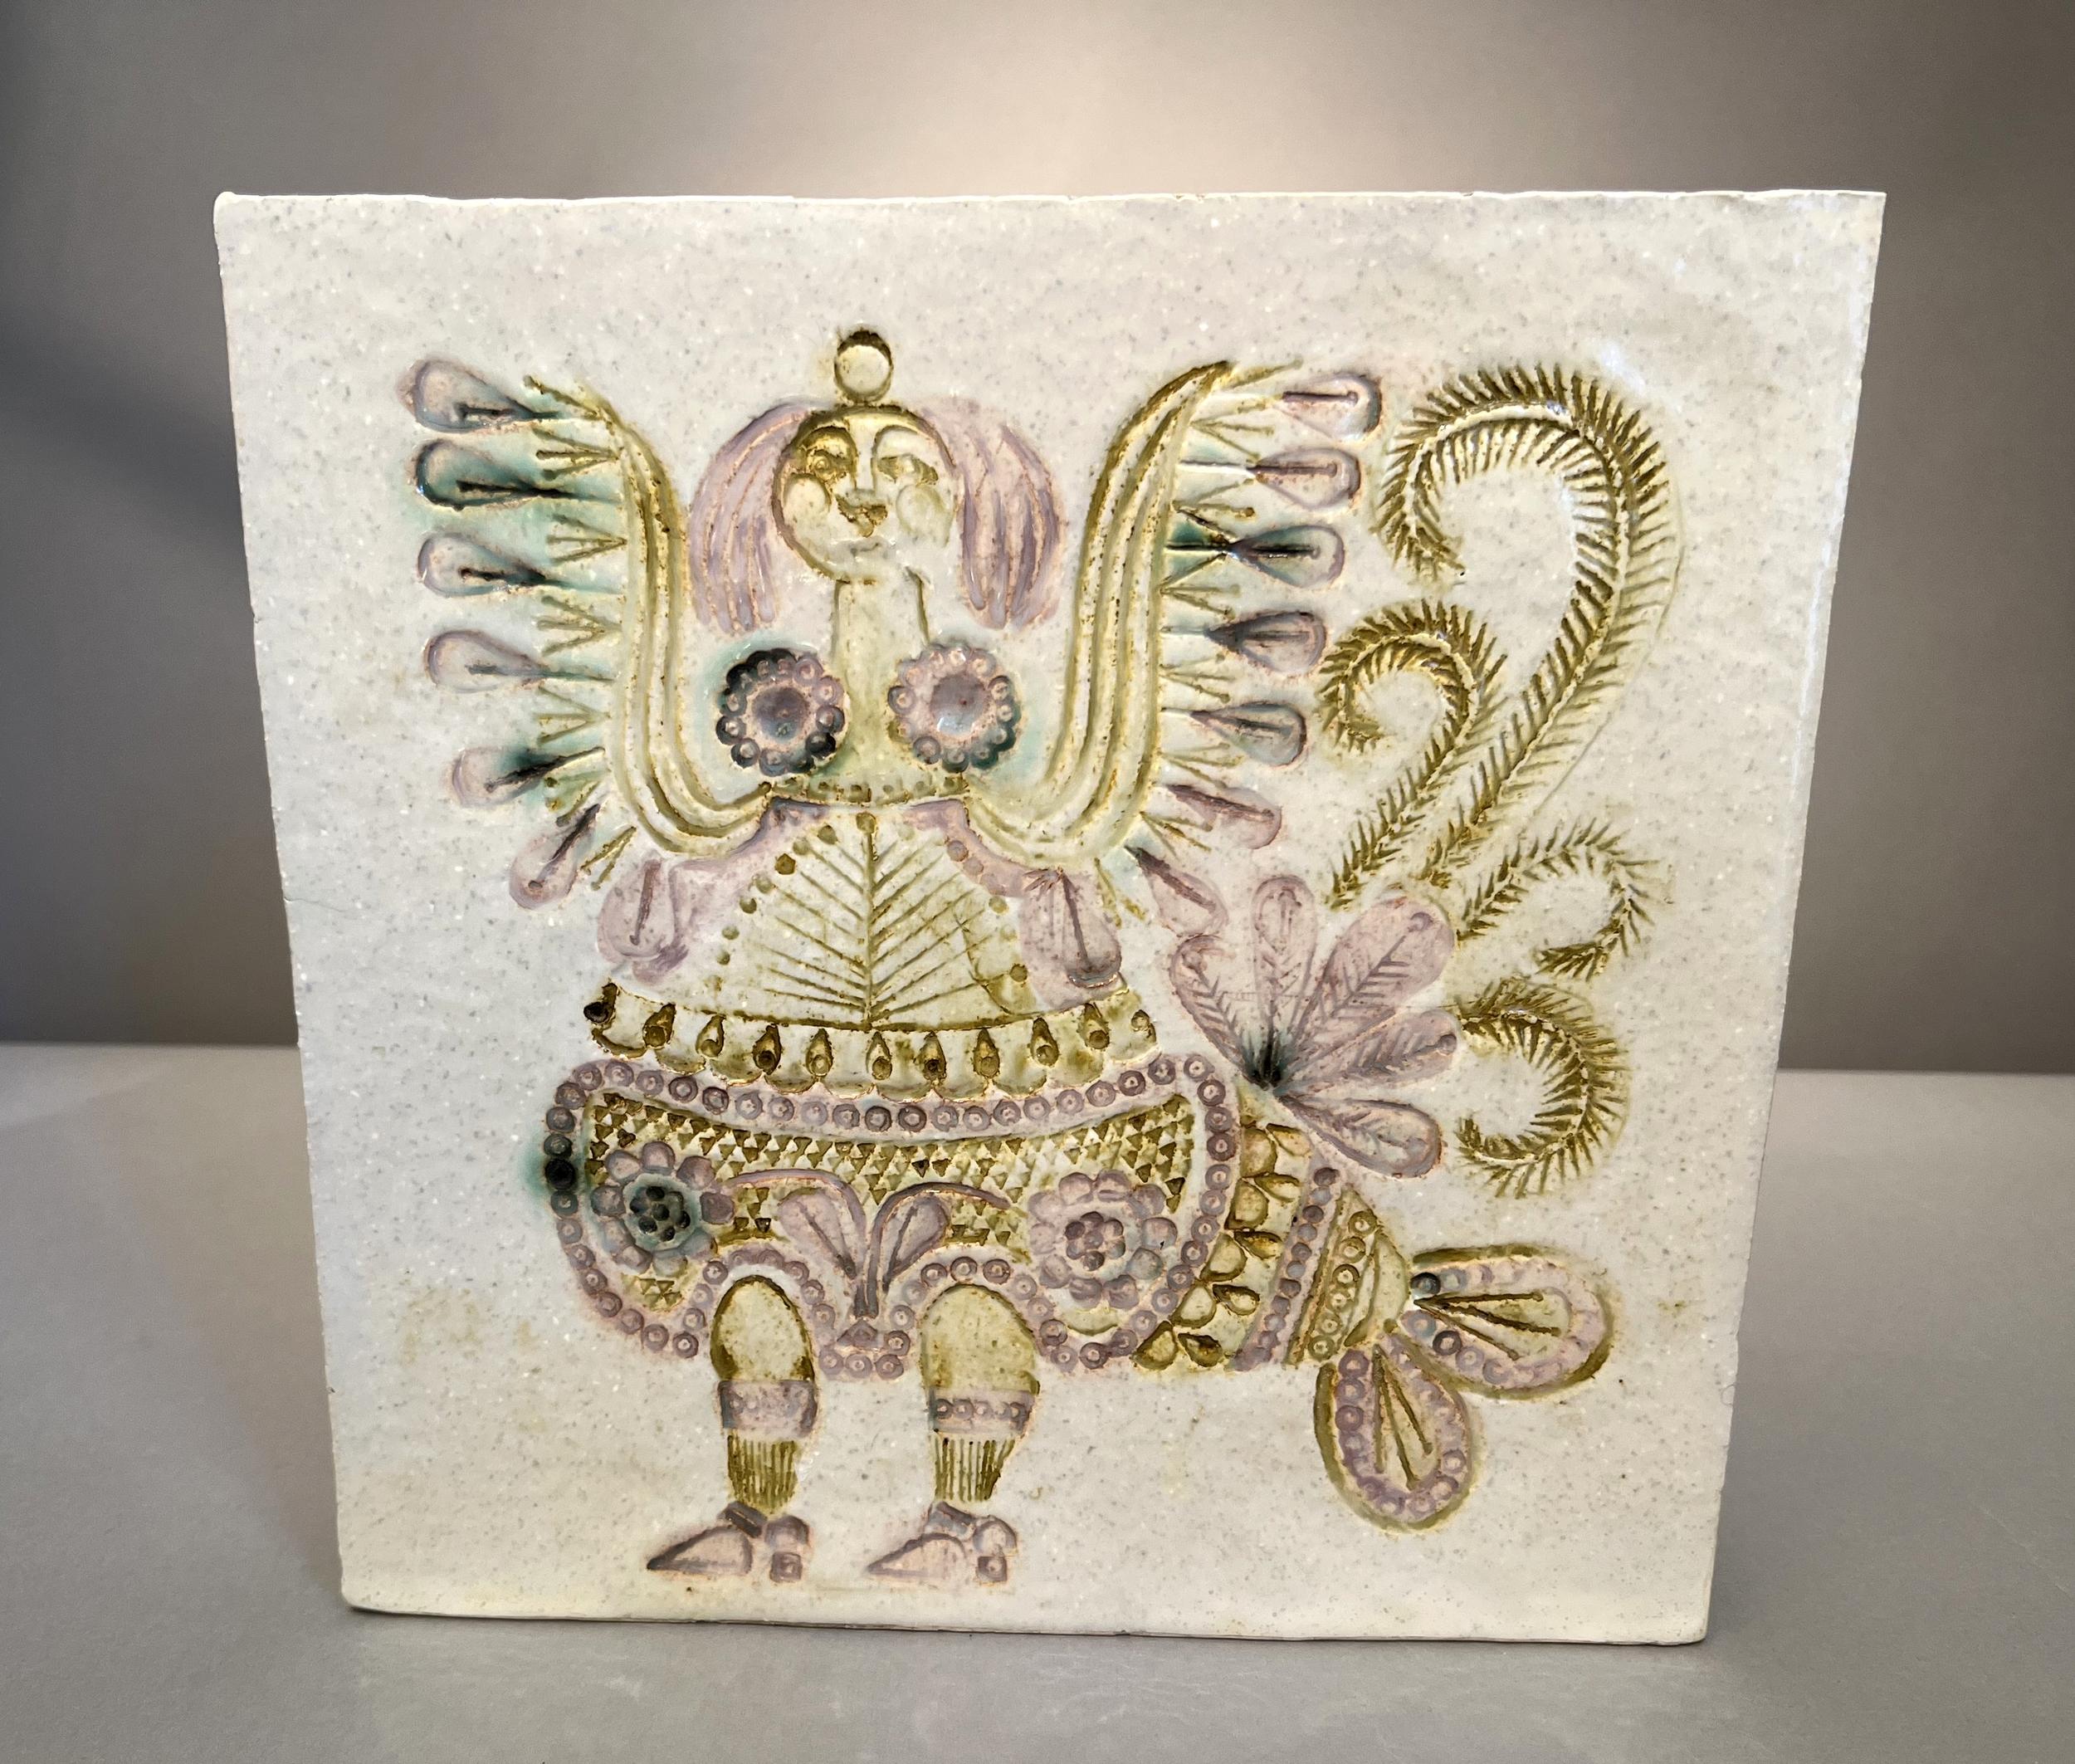 Rare square enameled stoneware vase by Capron in Vallauris, decorated with a winged chimera.
It is stamped « Capron Vallauris France ».